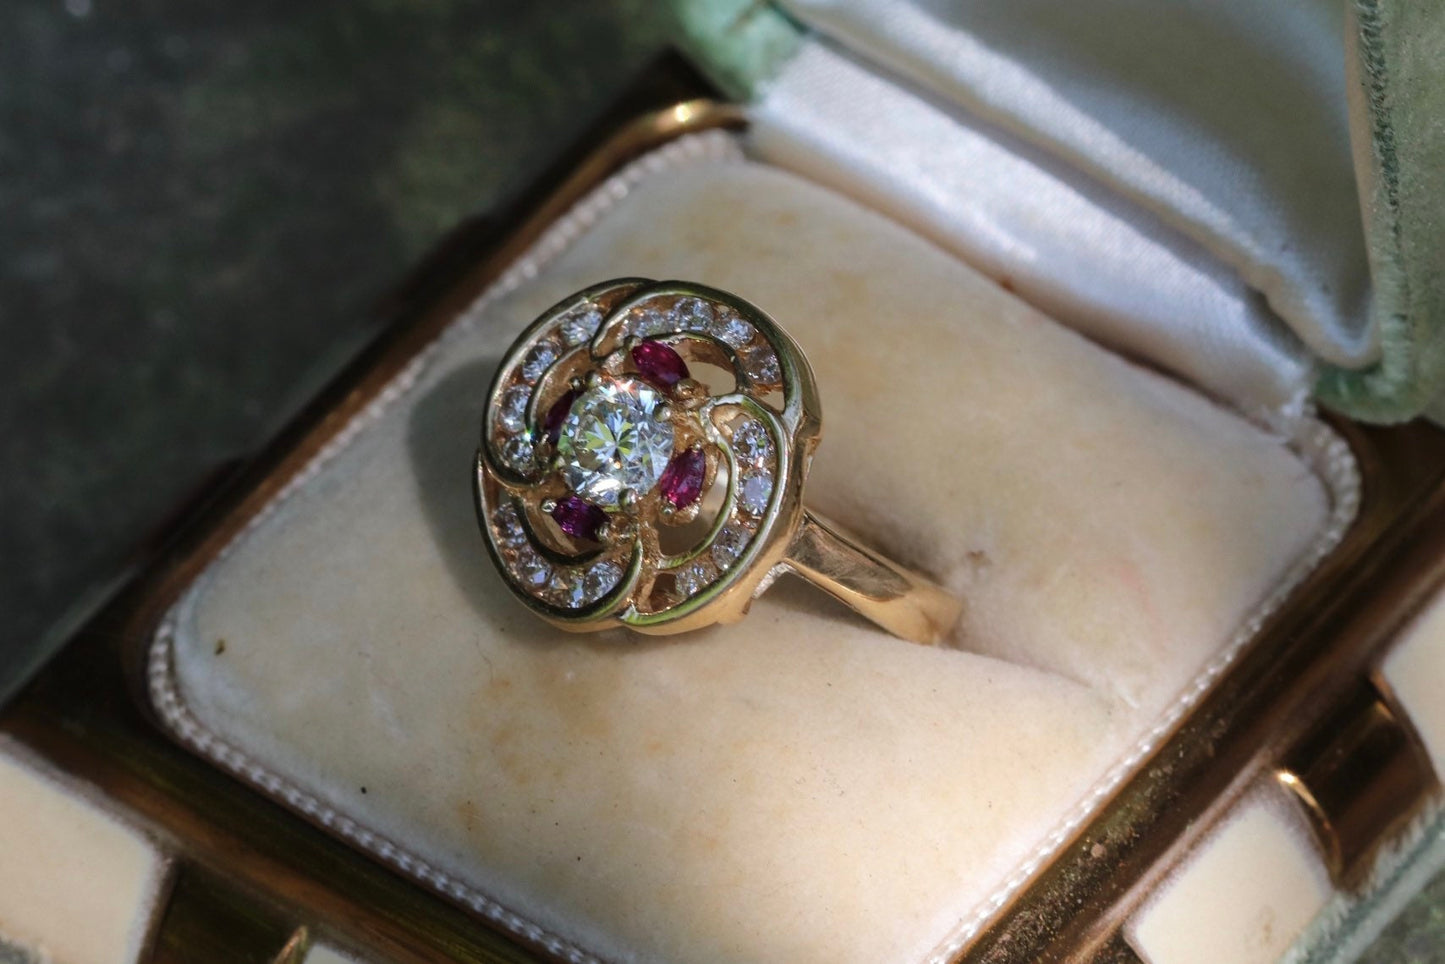 Transitional cut diamond set in 14k yellow gold surrounded by rubies and modern round diamonds size 5.75 (sizable)